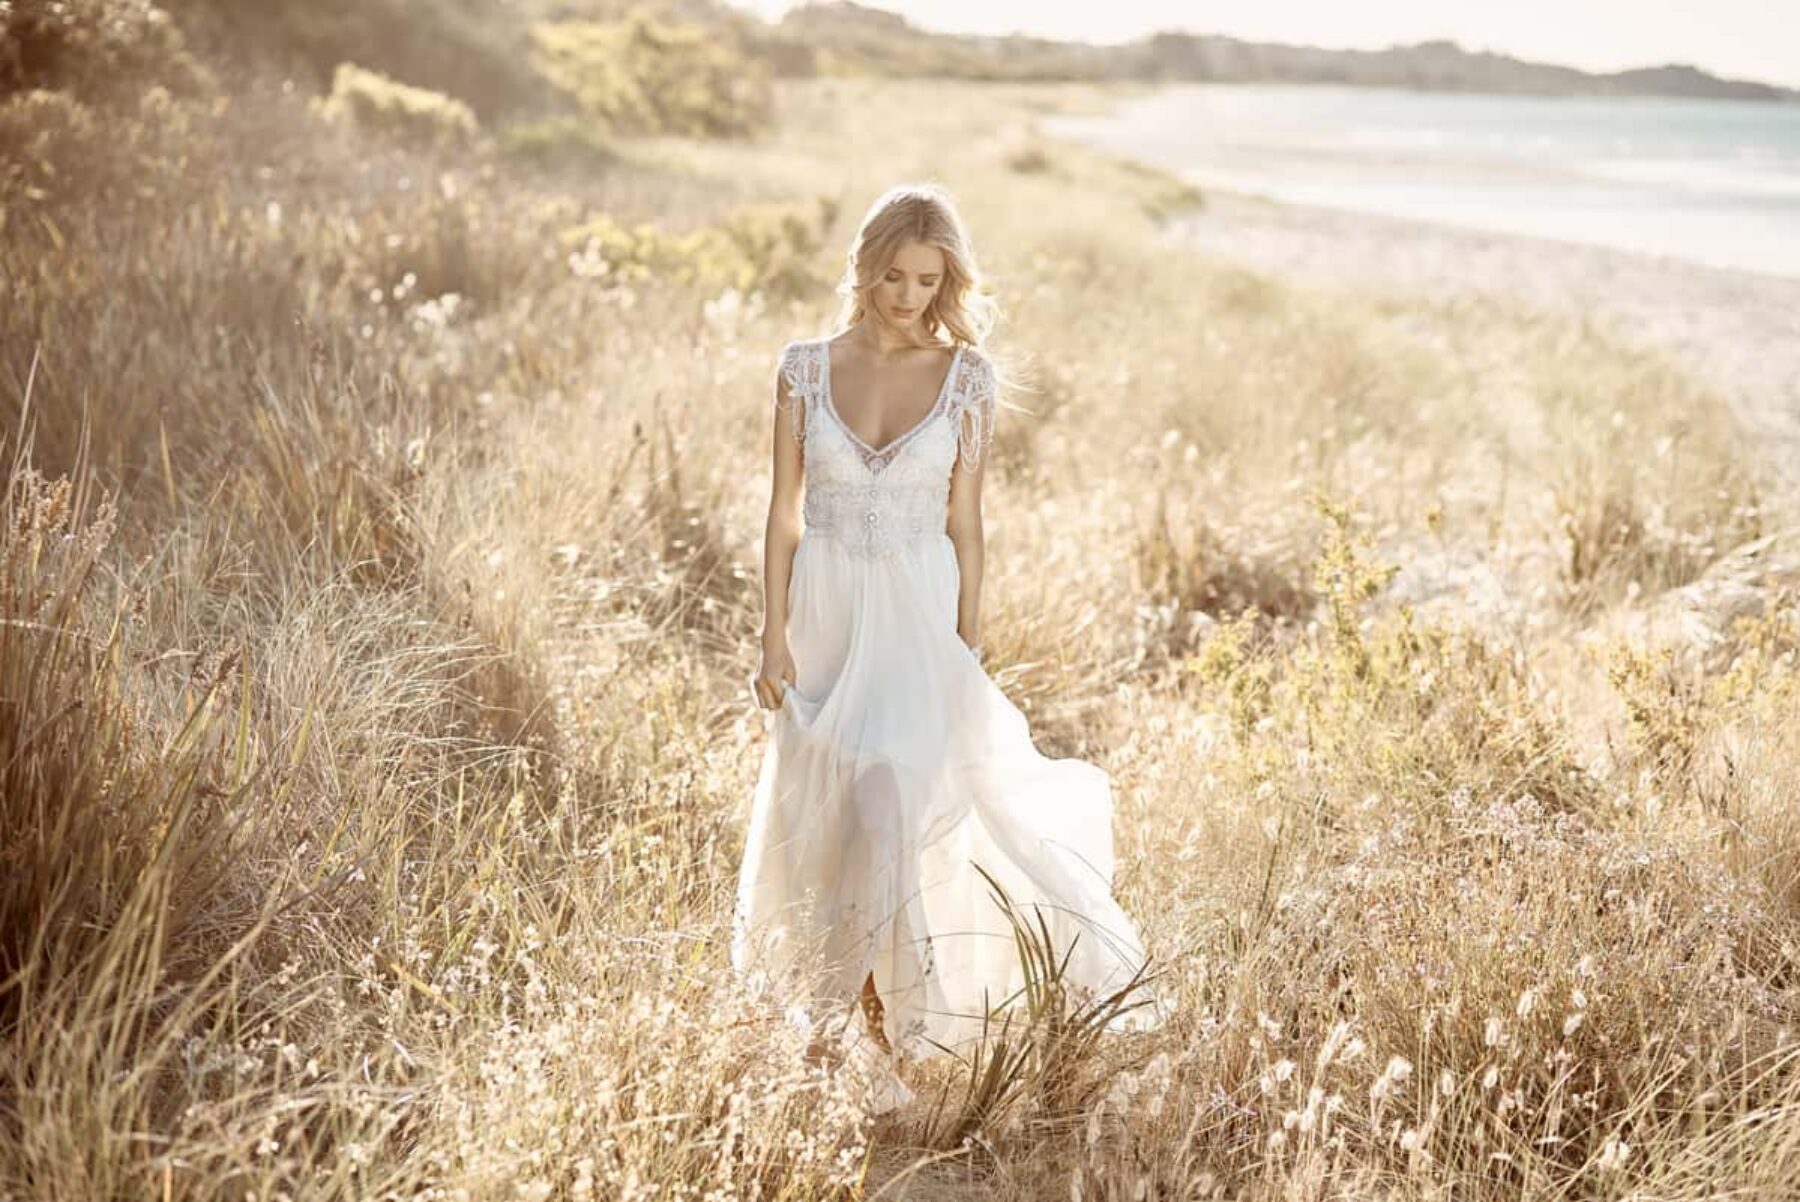 Anna Campbell Bridal 2017 - Signature capsule collection